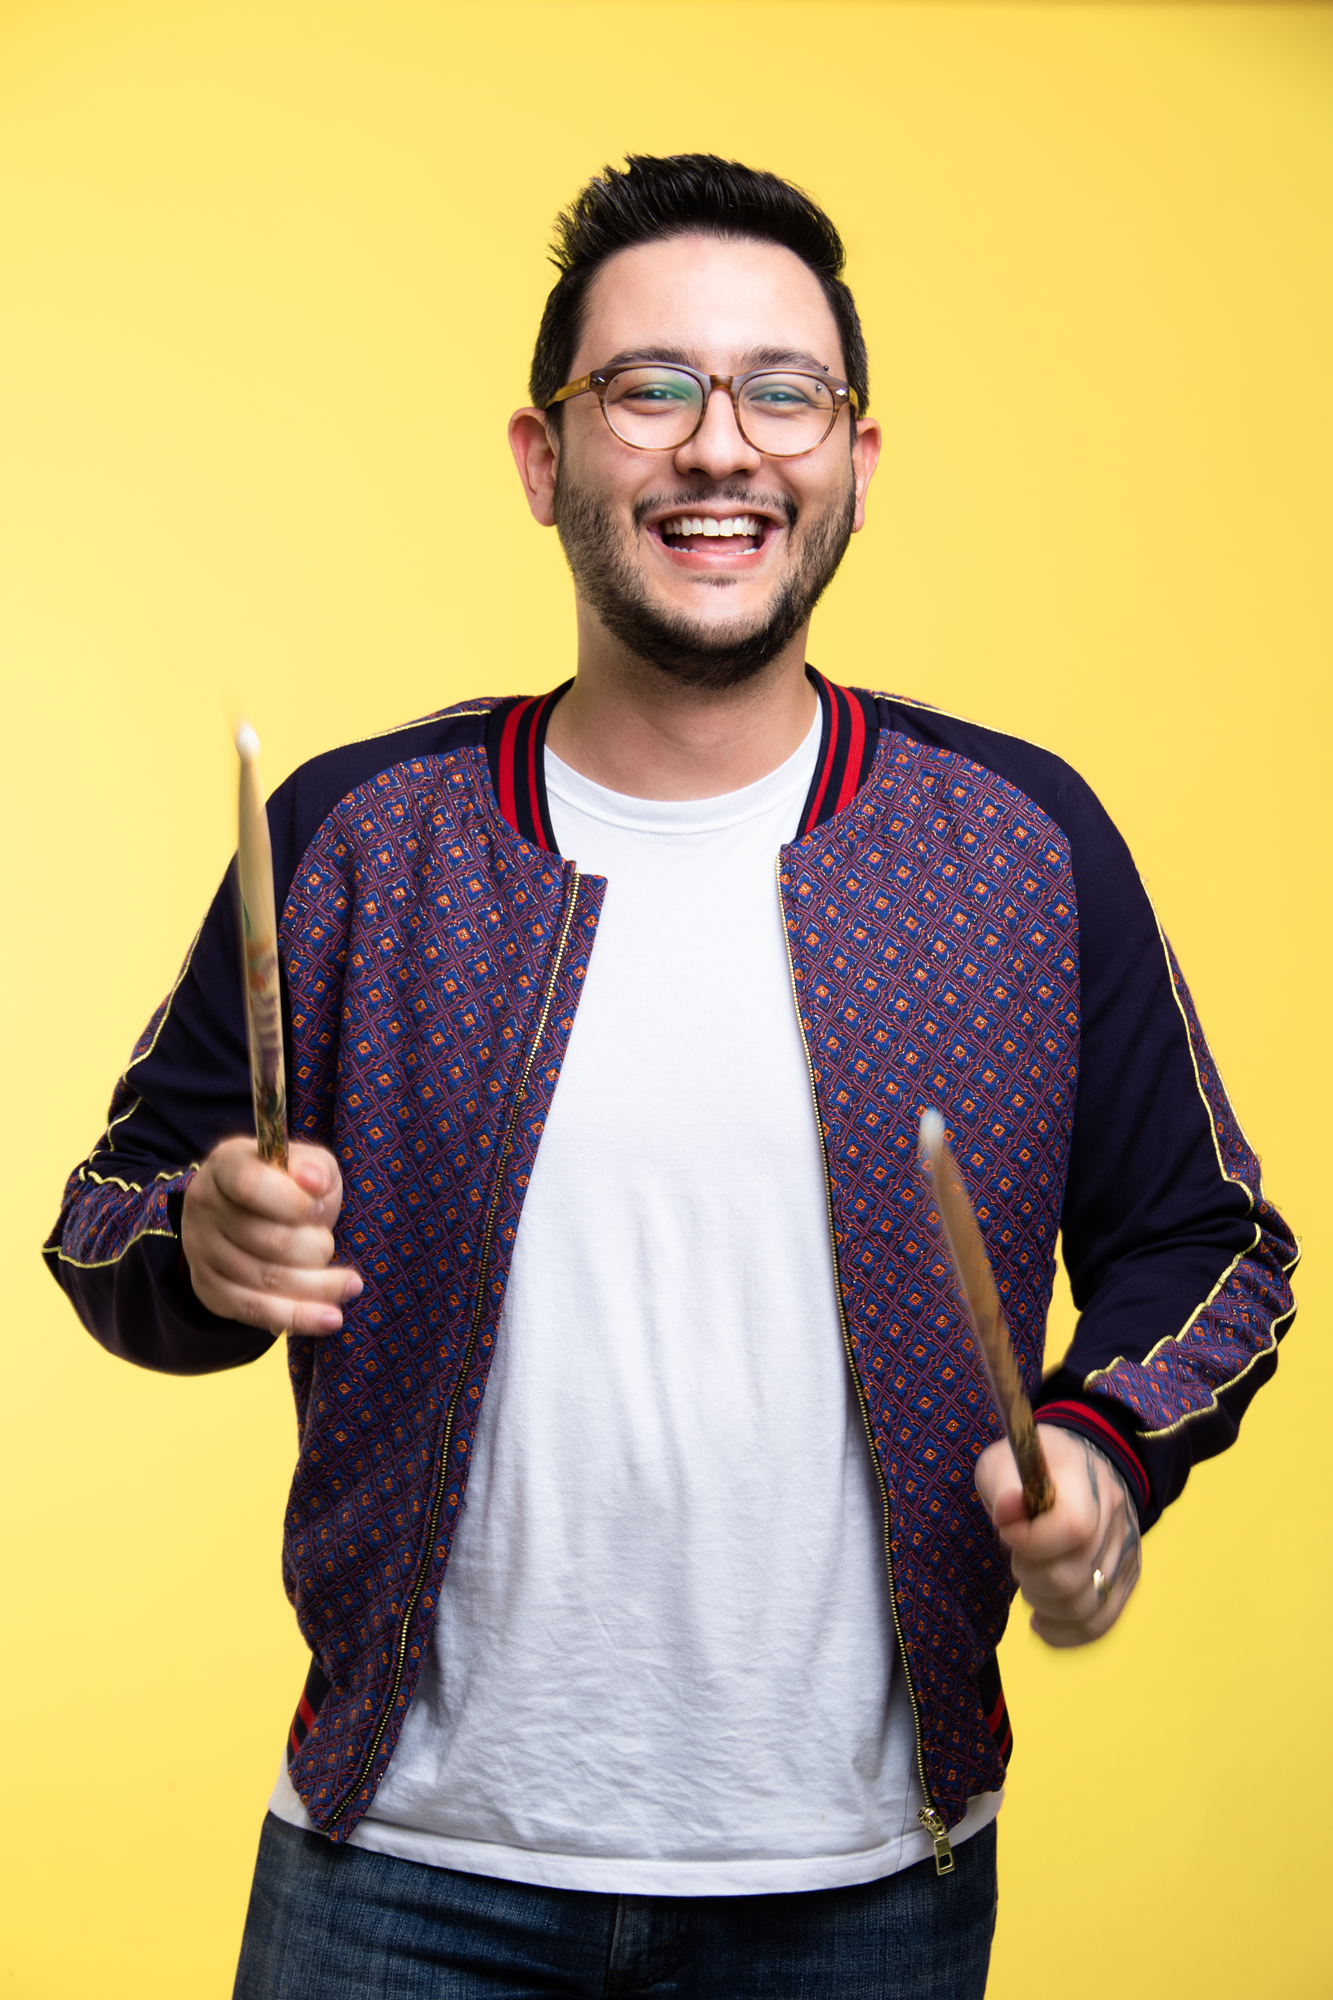 A picture of me, Paulo Cholla, wearing a purple jacket with some details, and a white t-shirt, smiling and holding drumsticks, against a yellow background